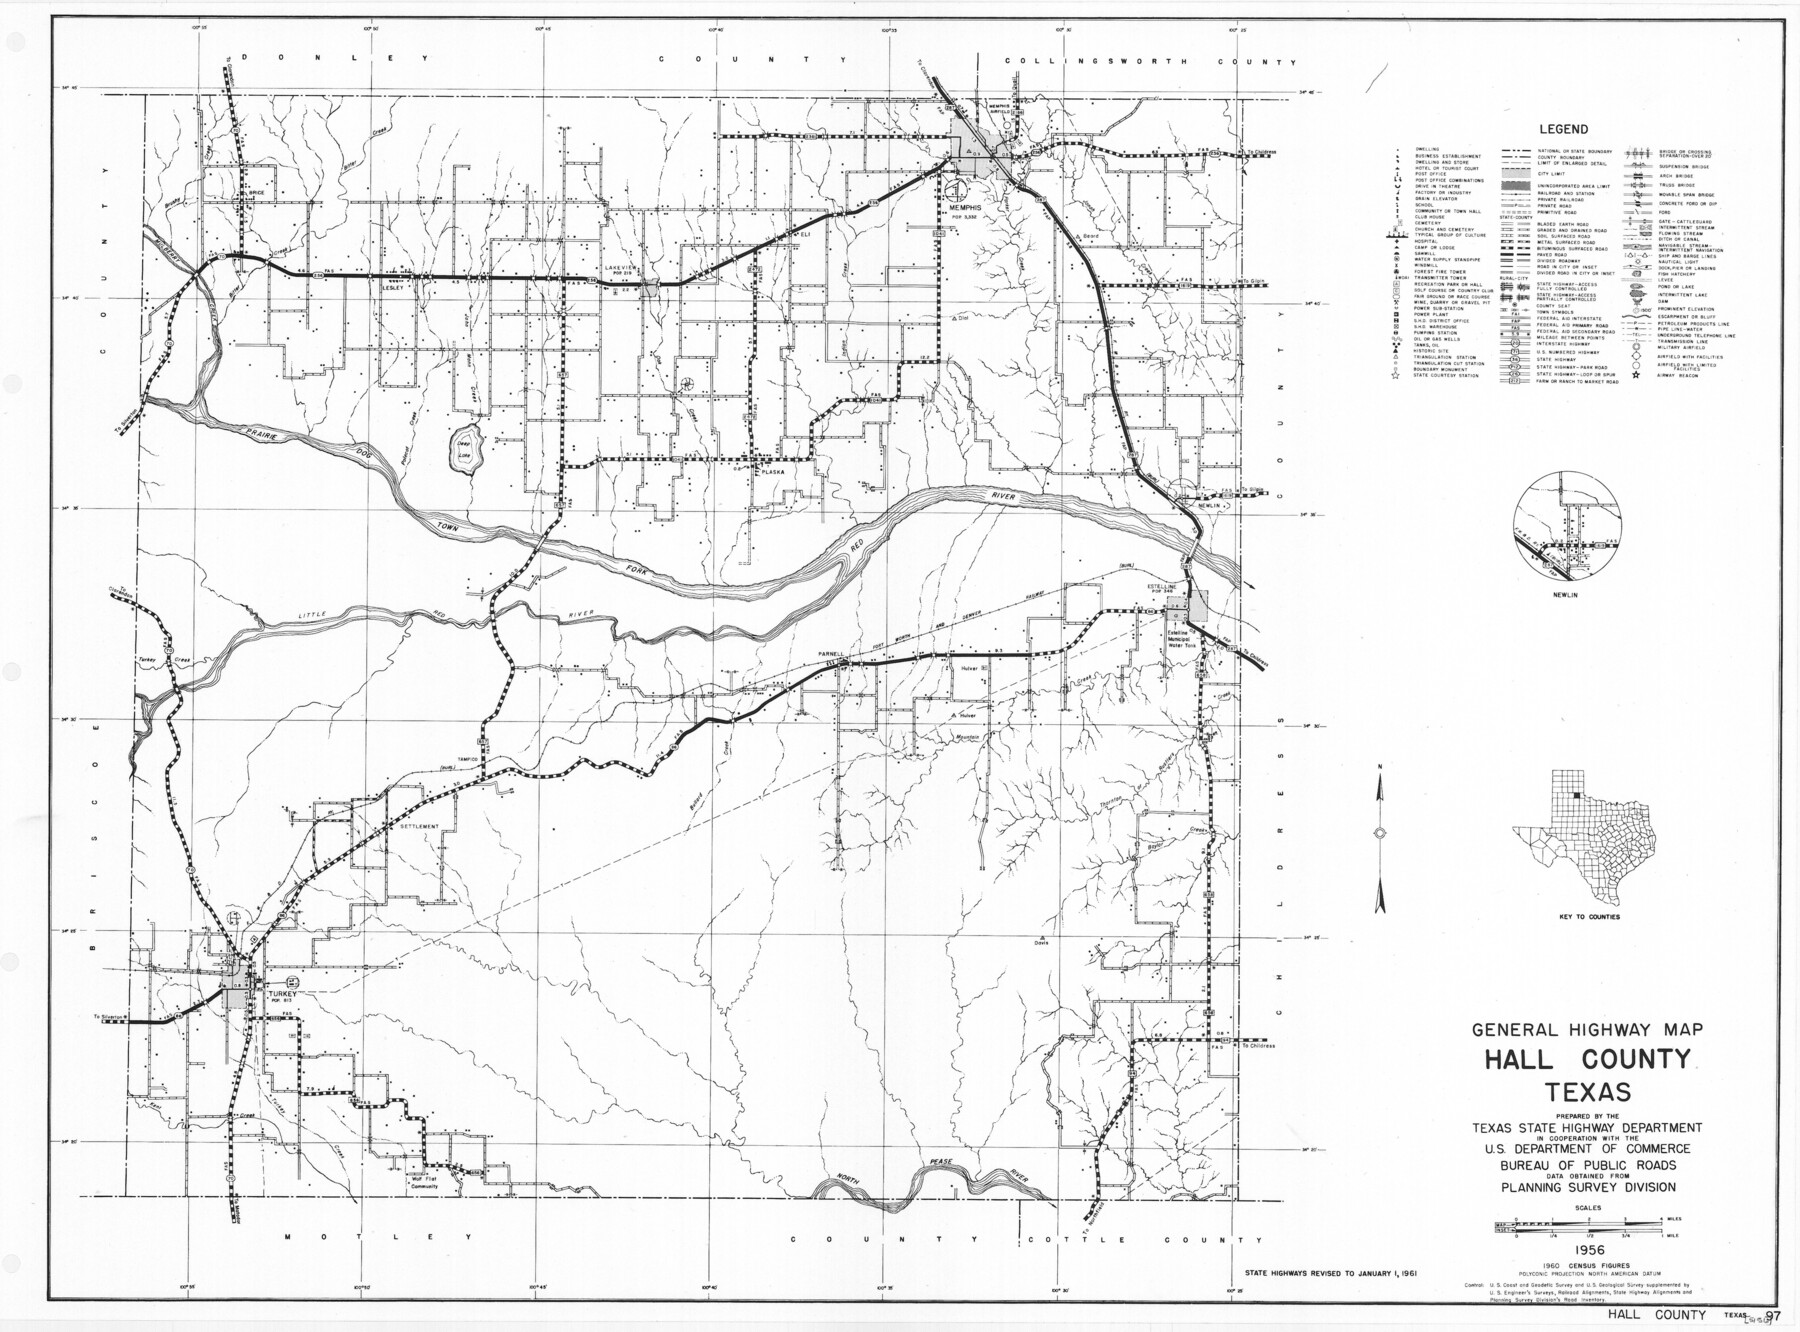 79495, General Highway Map, Hall County, Texas, Texas State Library and Archives